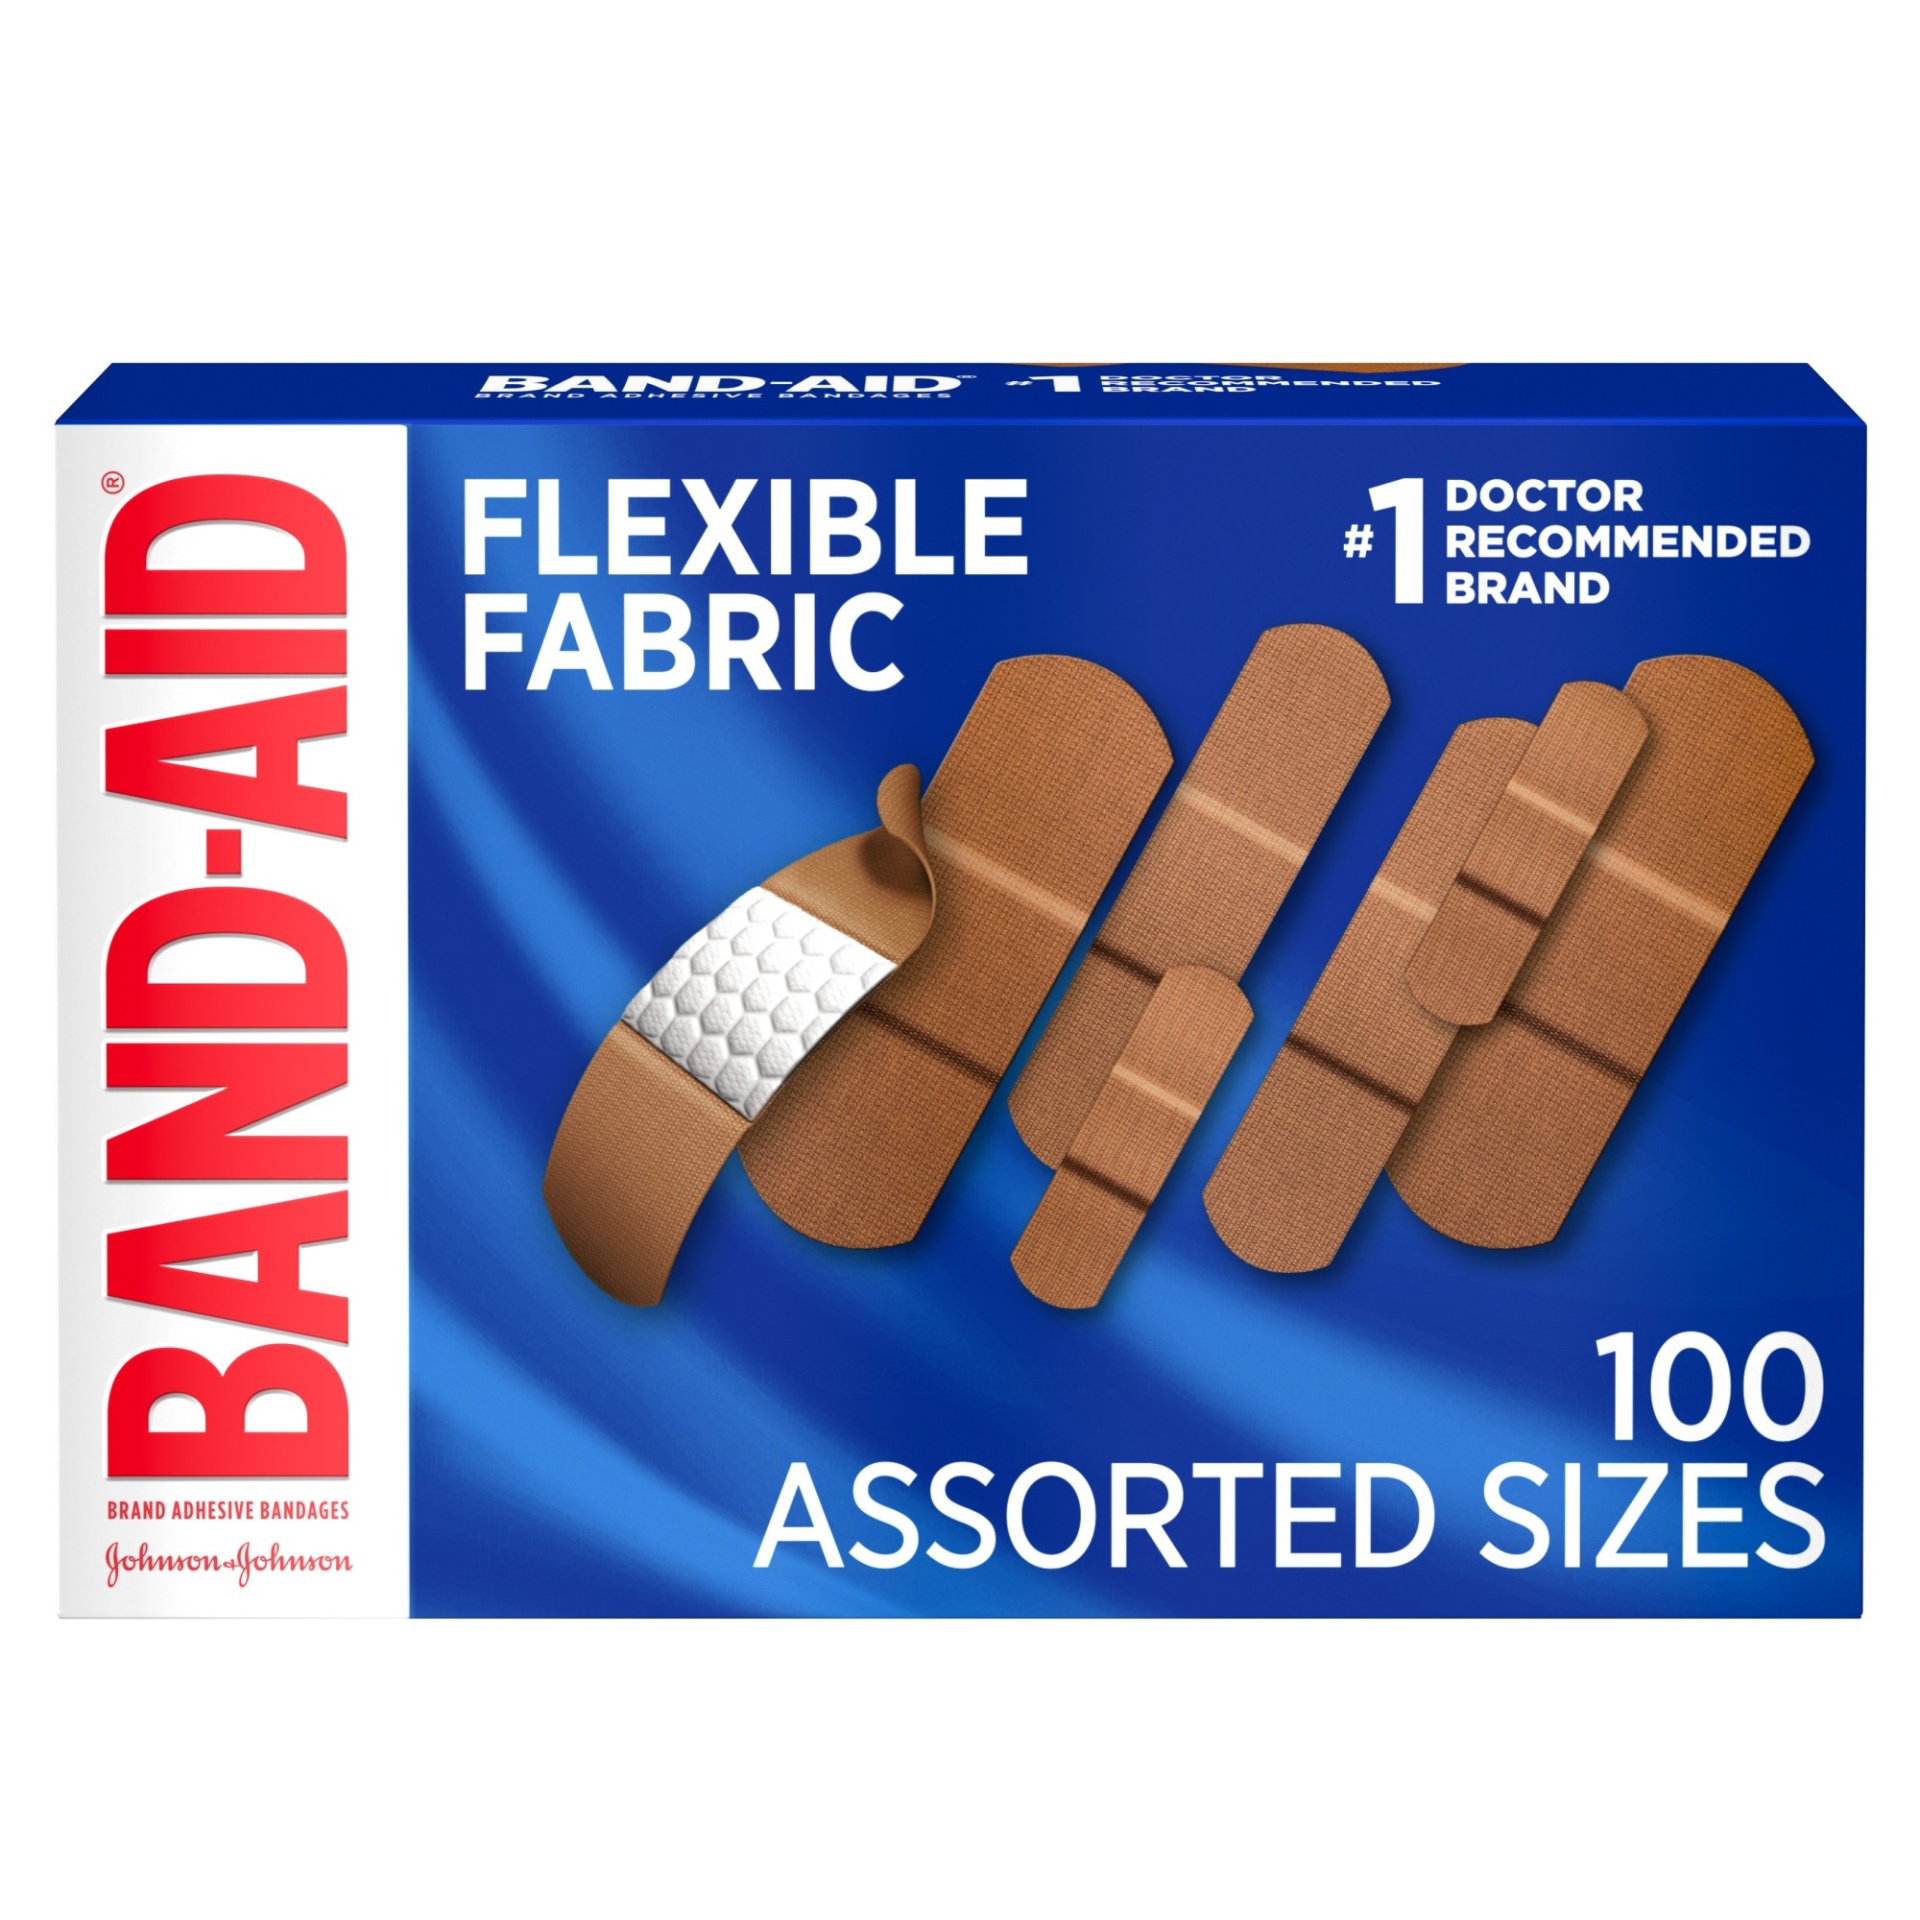 slide 1 of 1, Band-Aid Brand Flexible Fabric Adhesive Bandages, Comfortable Sterile Protection & Wound Care for Minor Cuts & Burns, Quilt-Aid Technology to Cushion Painful Wounds, Assorted Sizes, 100 ct